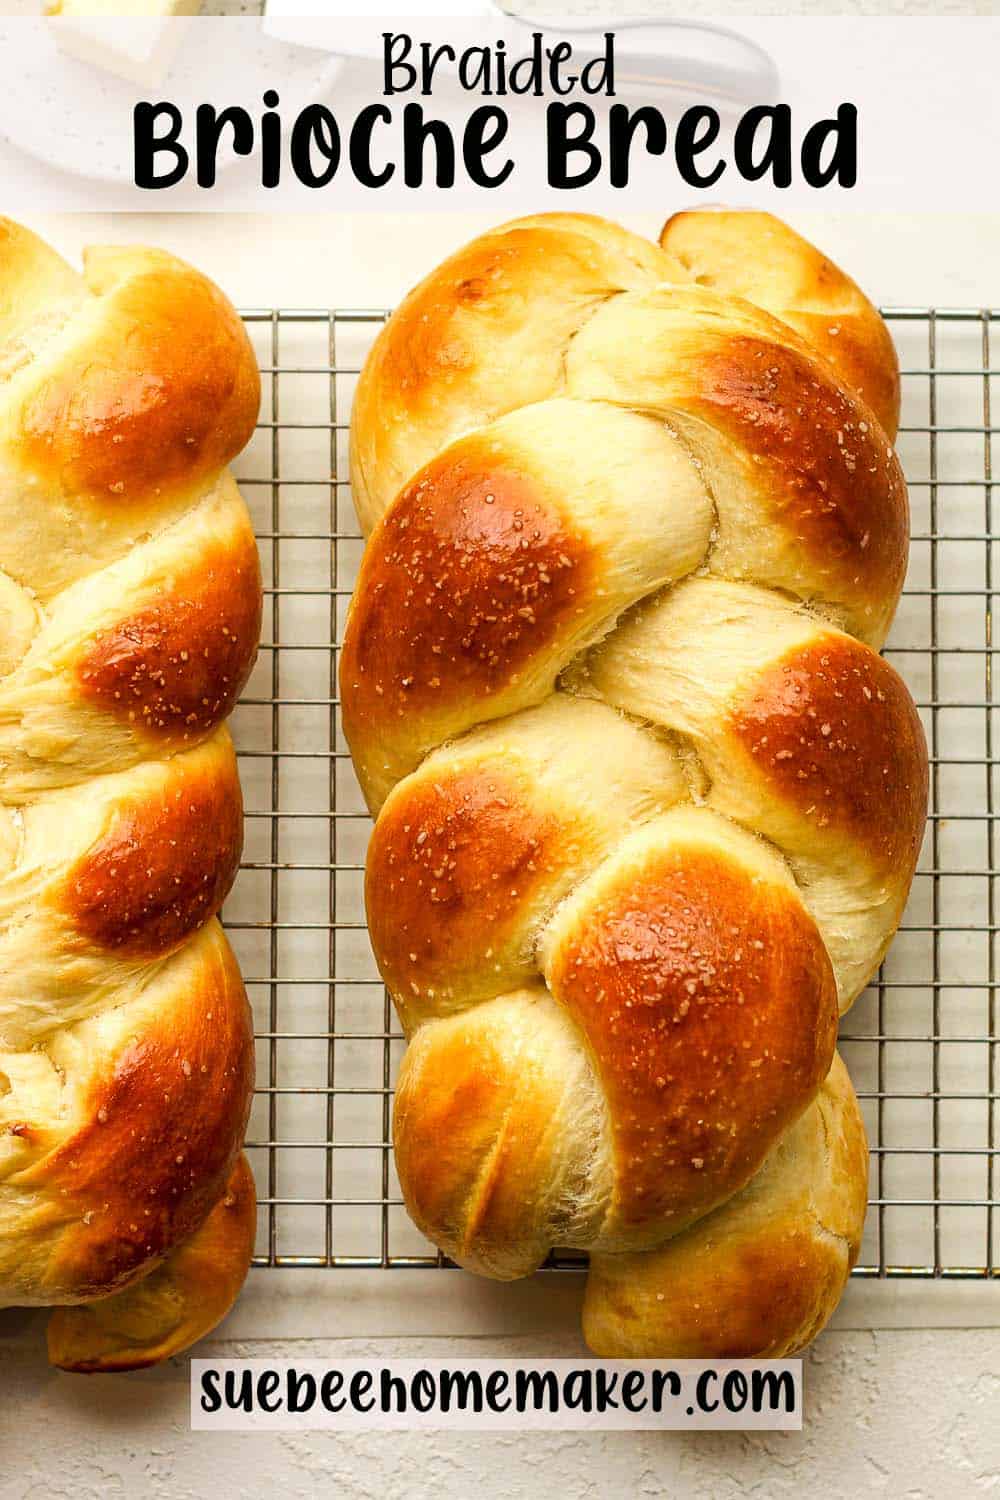 Two braided brioche loaves of bread on a wire rack.